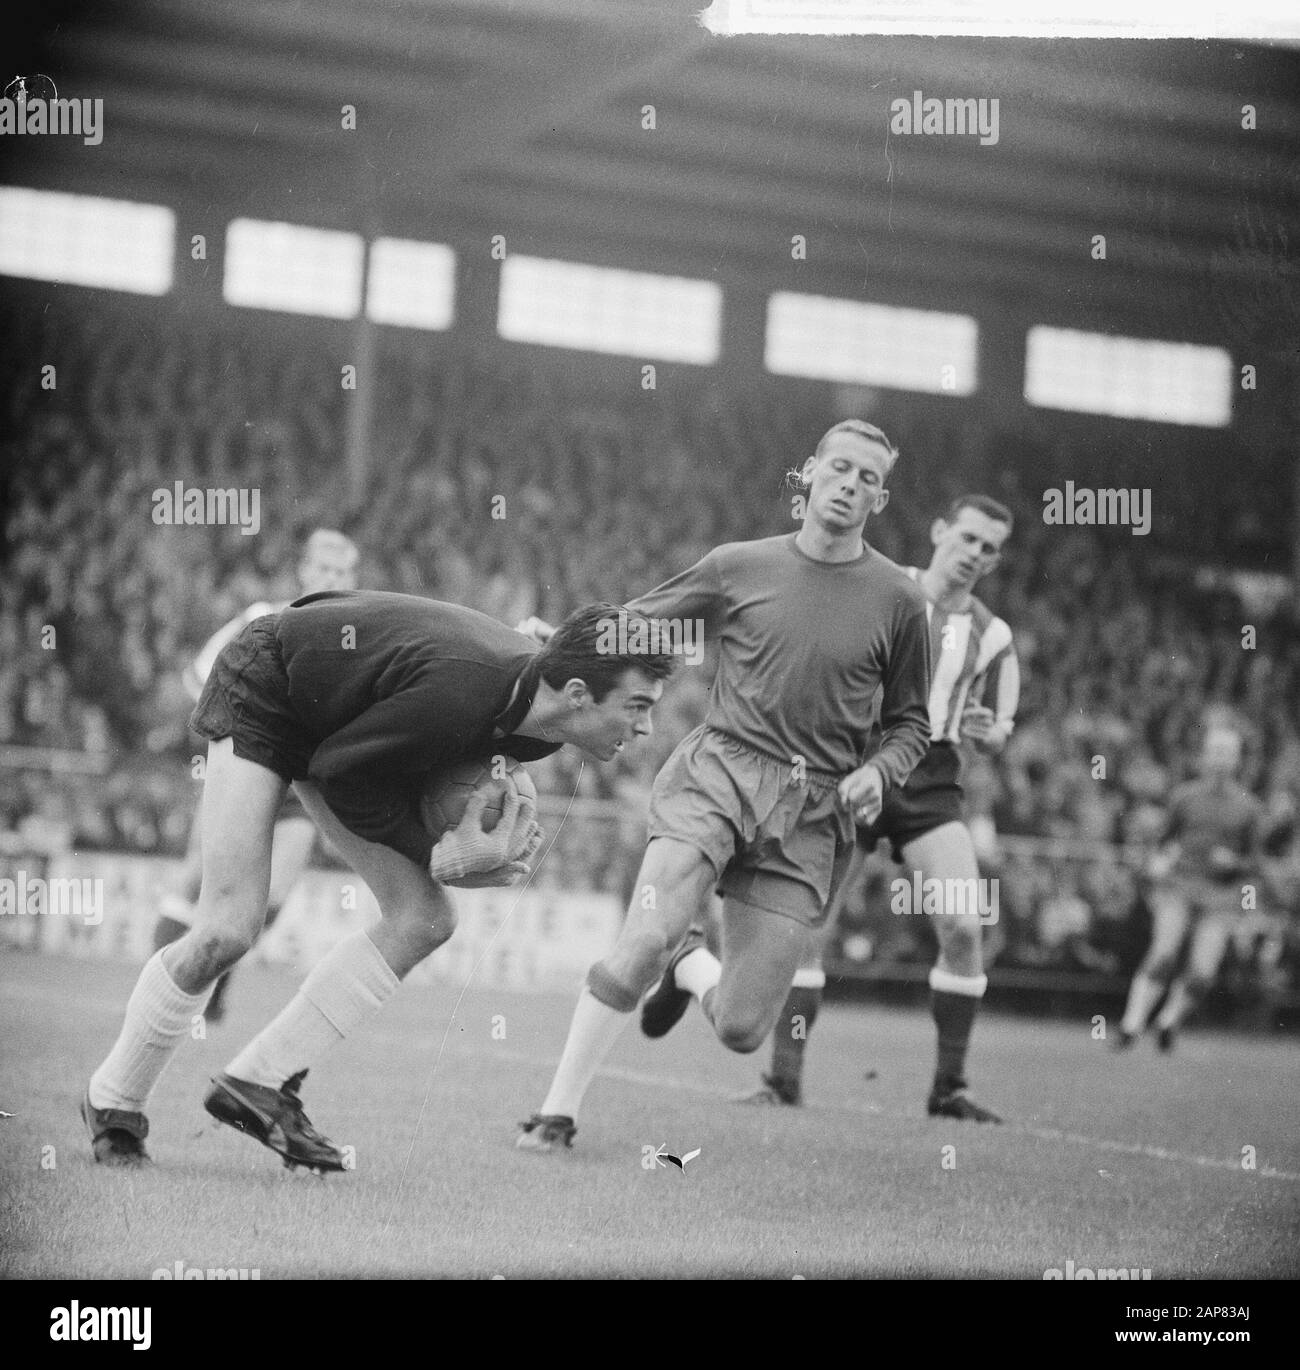 Ajax against PSV 2-0, Nuninga in duel with Strich Date: September 5, 1965 Keywords: duels, sport, football Stock Photo